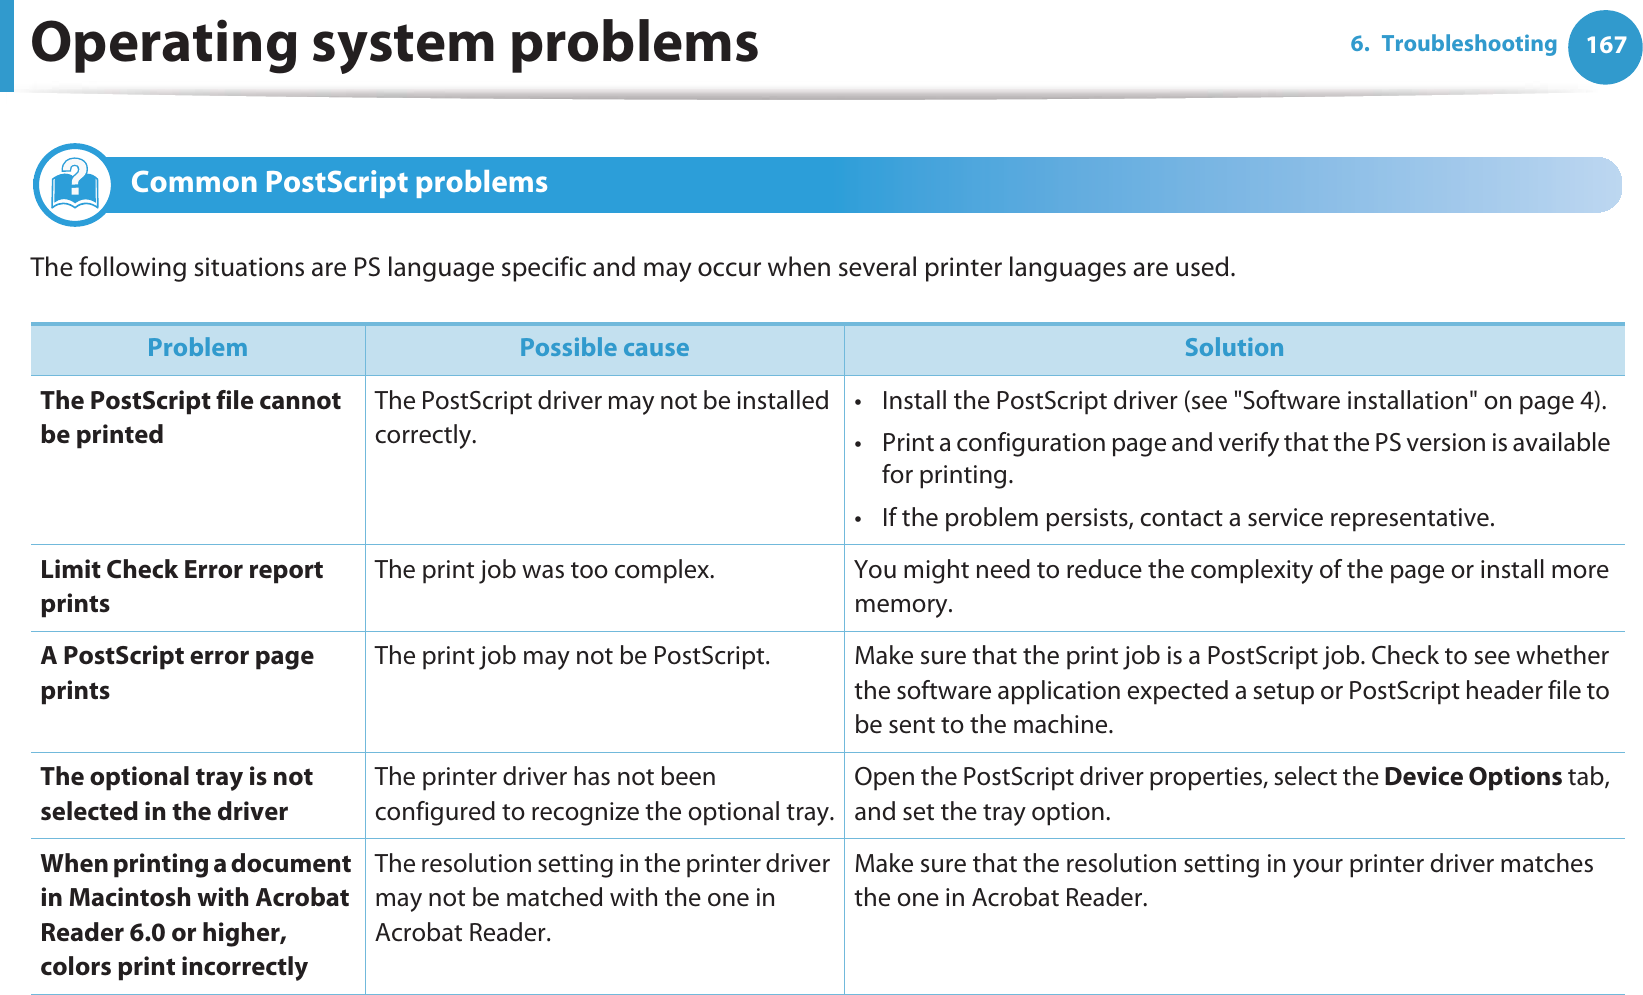 Operating system problems 1676. Troubleshooting4 Common PostScript problemsThe following situations are PS language specific and may occur when several printer languages are used.  Problem Possible cause SolutionThe PostScript file cannot be printedThe PostScript driver may not be installed correctly.• Install the PostScript driver (see &quot;Software installation&quot; on page 4).• Print a configuration page and verify that the PS version is available for printing.• If the problem persists, contact a service representative.Limit Check Error report printsThe print job was too complex. You might need to reduce the complexity of the page or install more memory.A PostScript error page printsThe print job may not be PostScript. Make sure that the print job is a PostScript job. Check to see whether the software application expected a setup or PostScript header file to be sent to the machine.The optional tray is not selected in the driverThe printer driver has not been configured to recognize the optional tray.Open the PostScript driver properties, select the Device Options tab, and set the tray option.When printing a document in Macintosh with Acrobat Reader 6.0 or higher, colors print incorrectlyThe resolution setting in the printer driver may not be matched with the one in Acrobat Reader.Make sure that the resolution setting in your printer driver matches the one in Acrobat Reader.